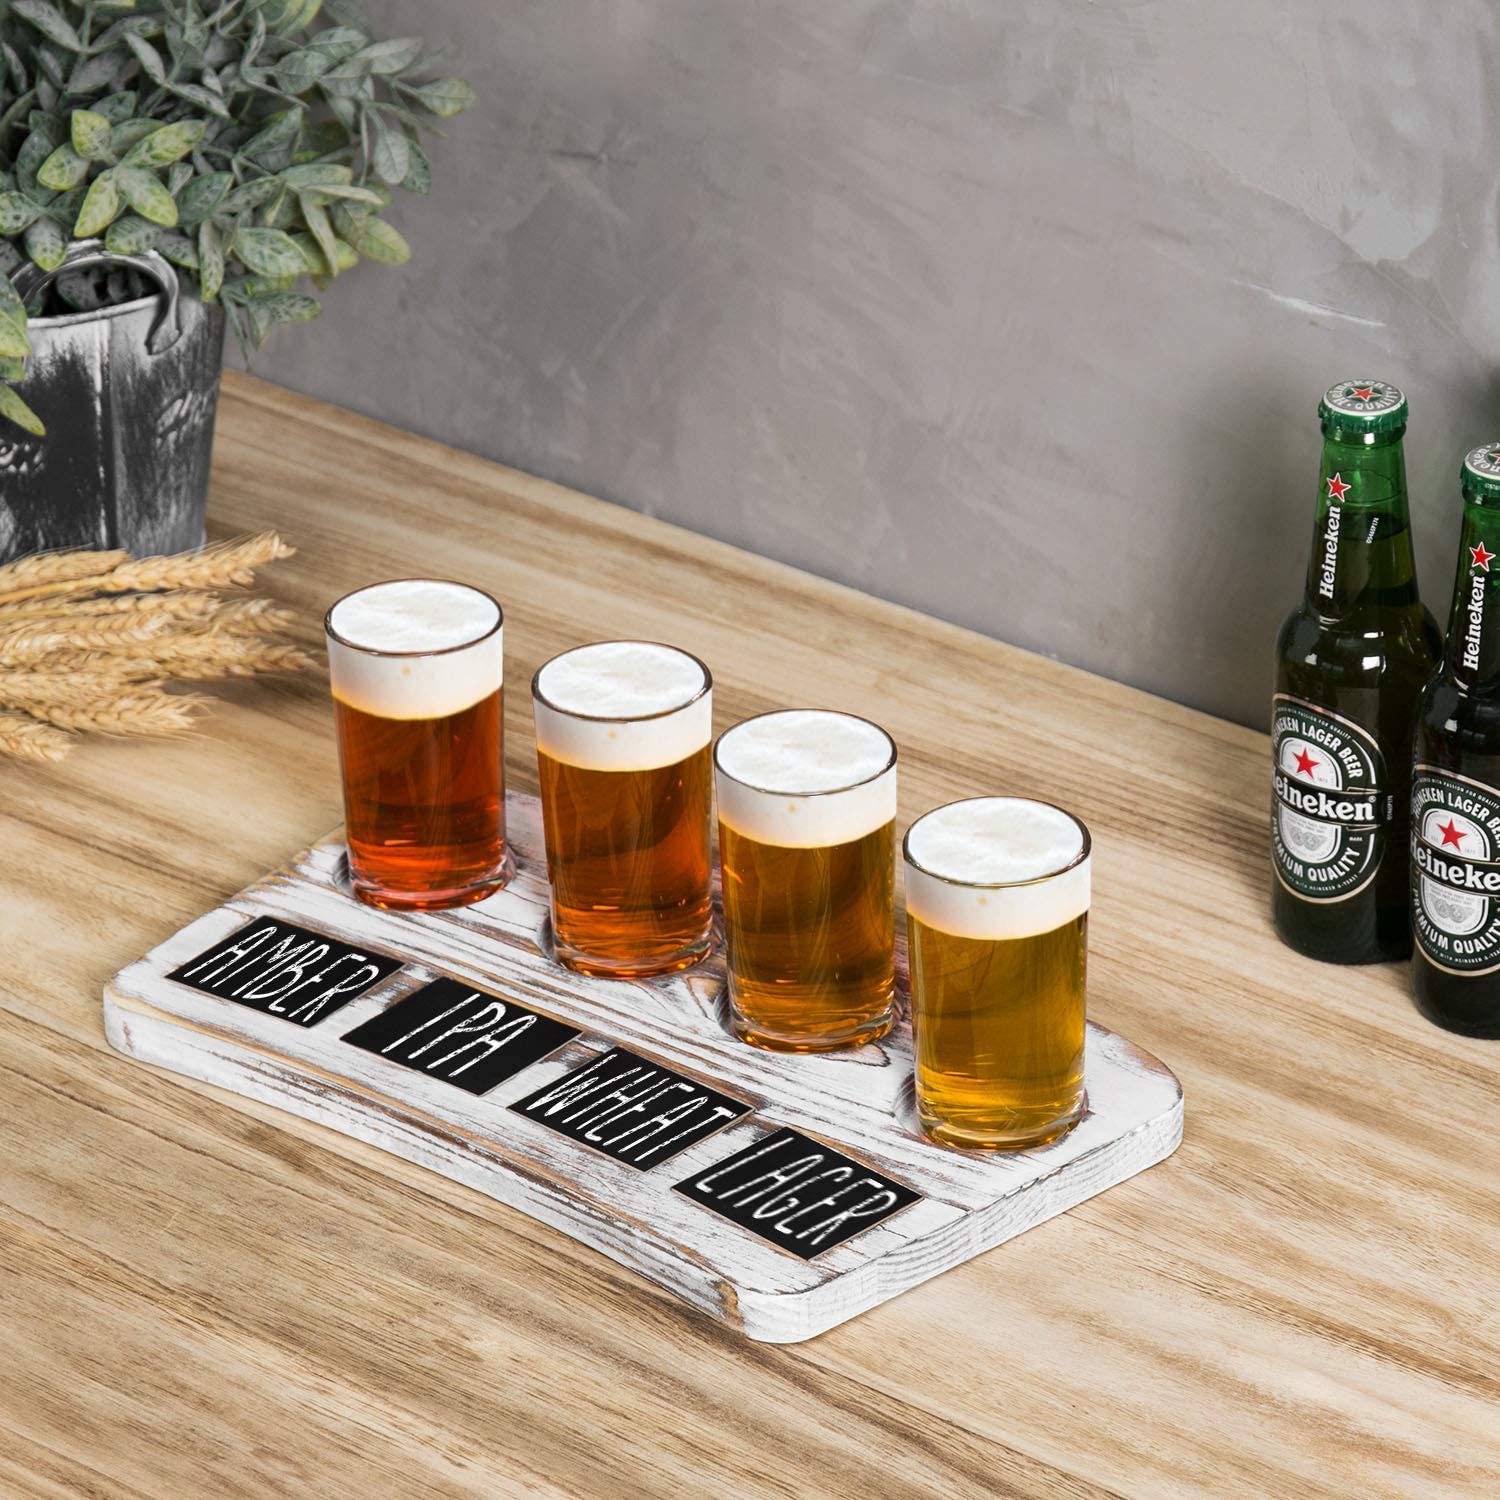 MyGift 4-Glass Whitewashed Wood Beer Flight Sampler Serving Tray with Chalkboard Labels - image 4 of 7